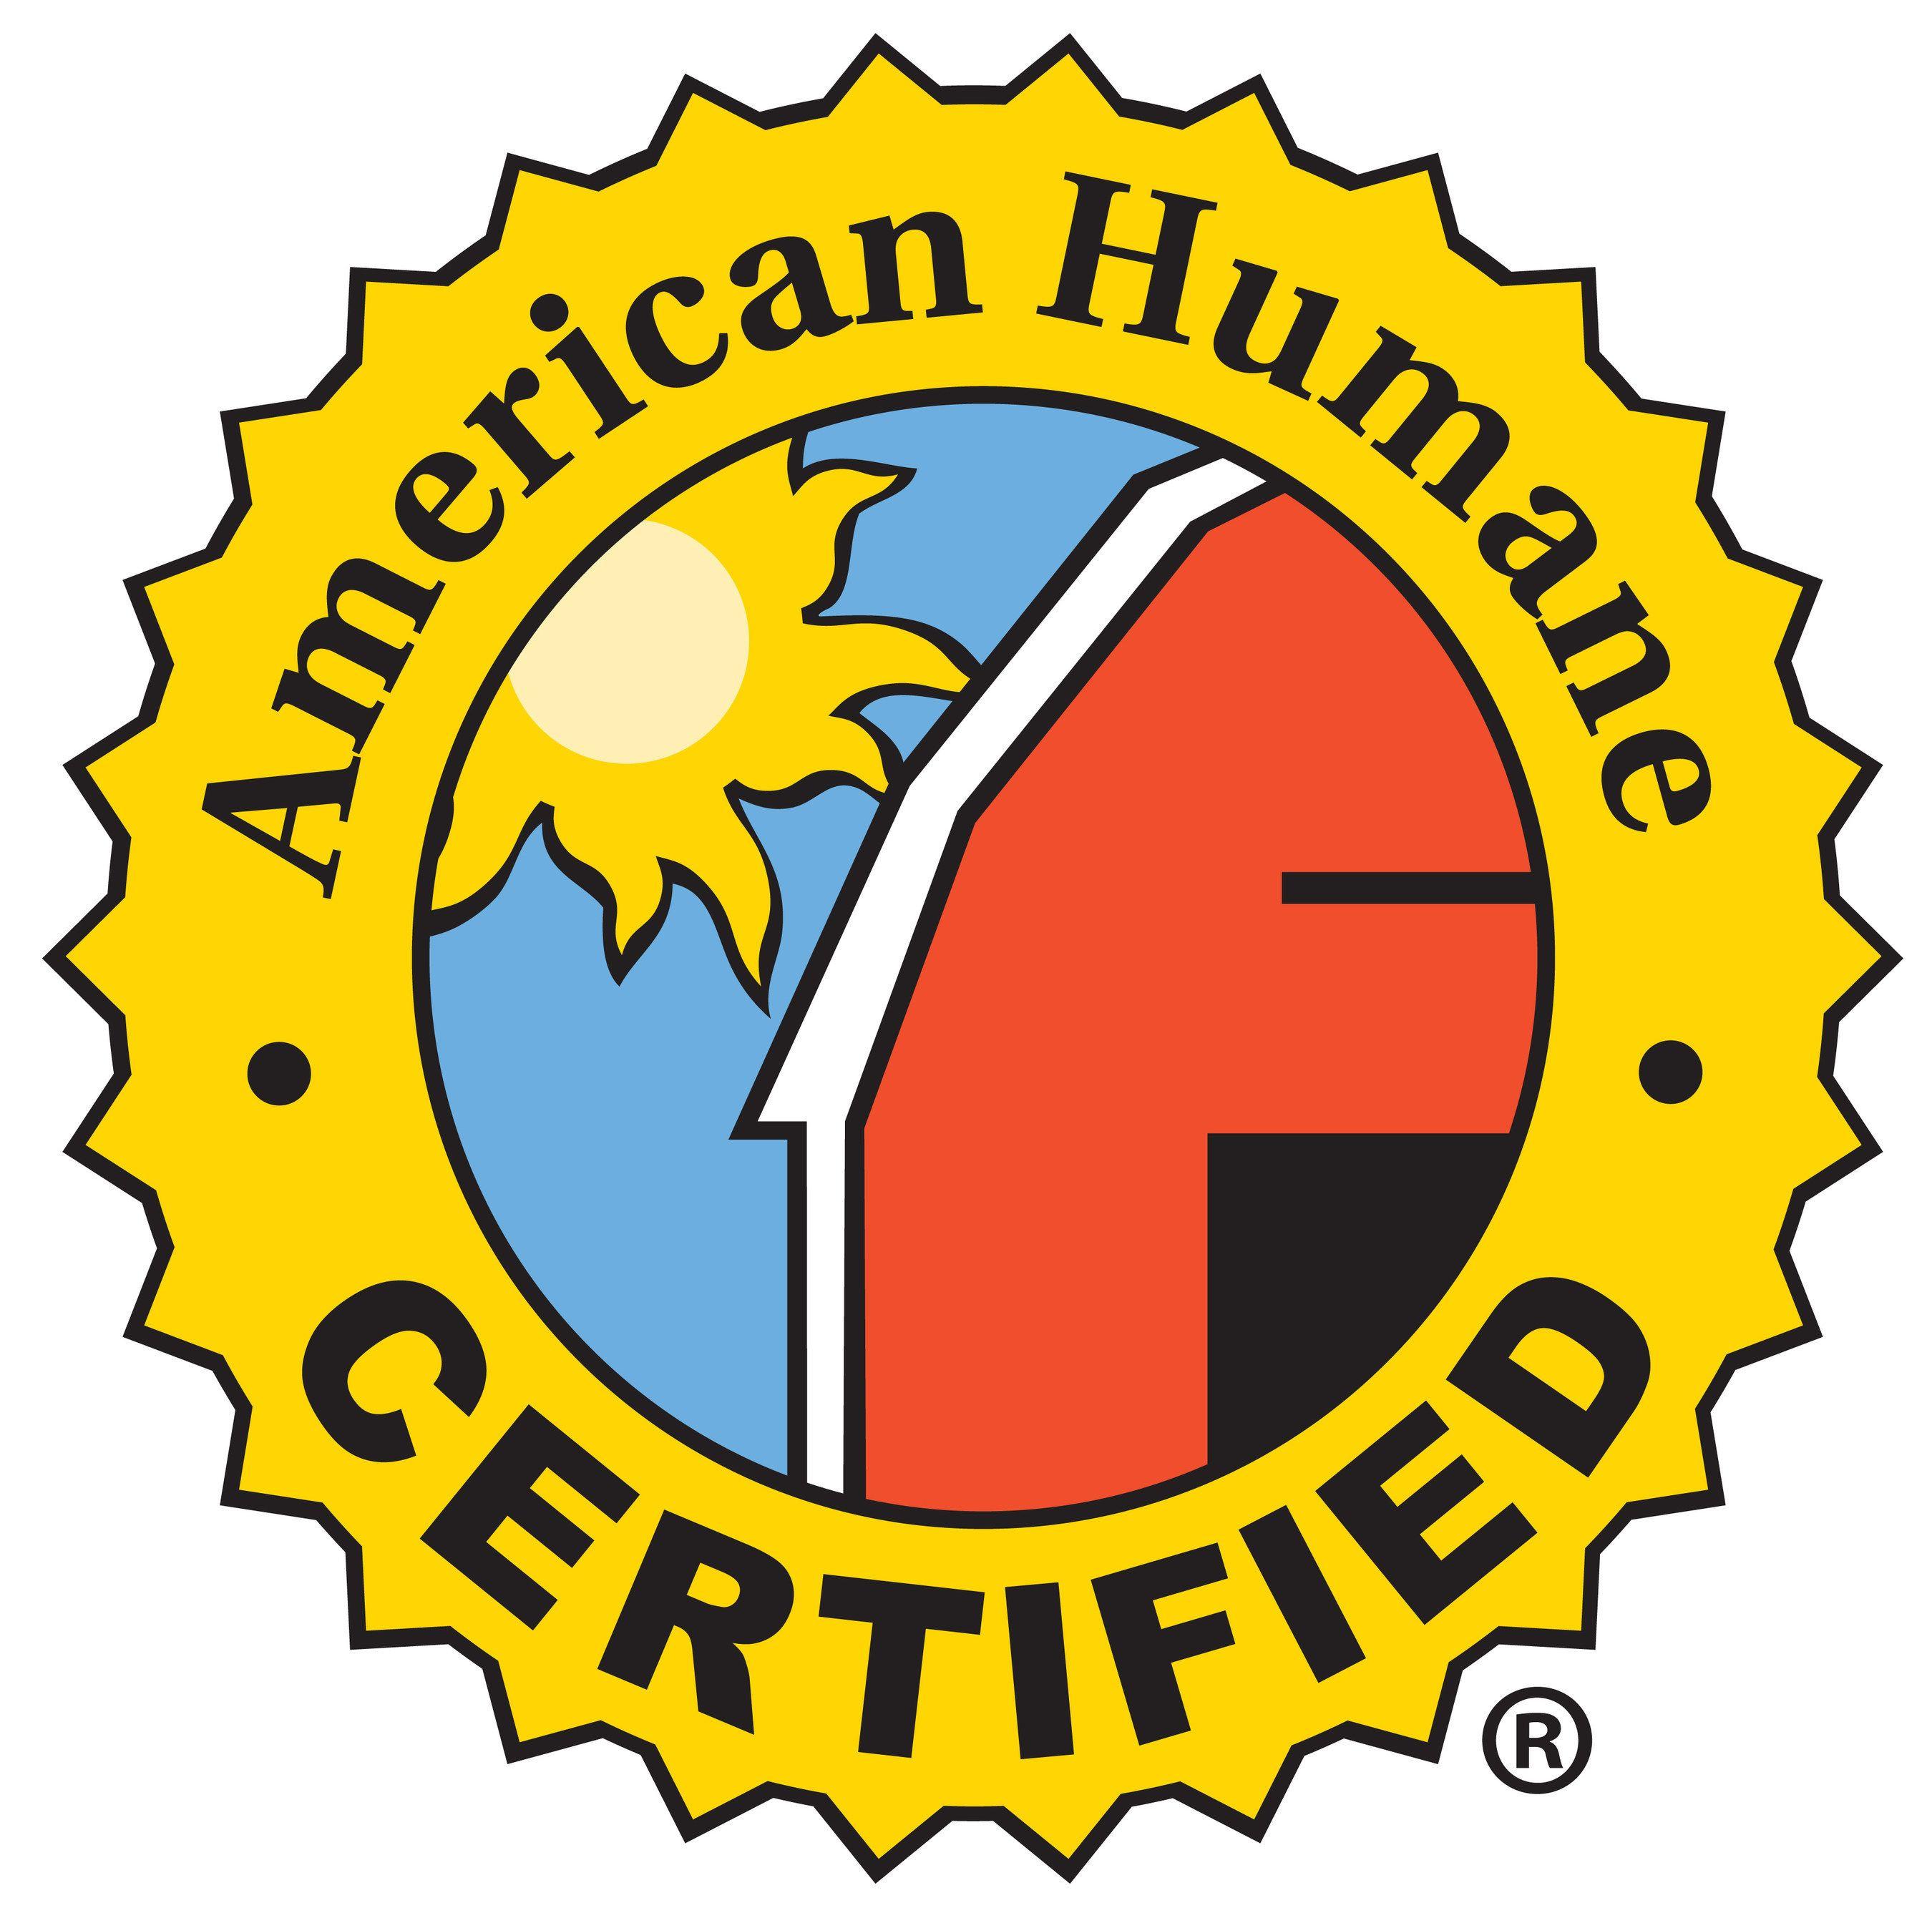 American with Red and Yellow Logo - American Humane Certified Logo